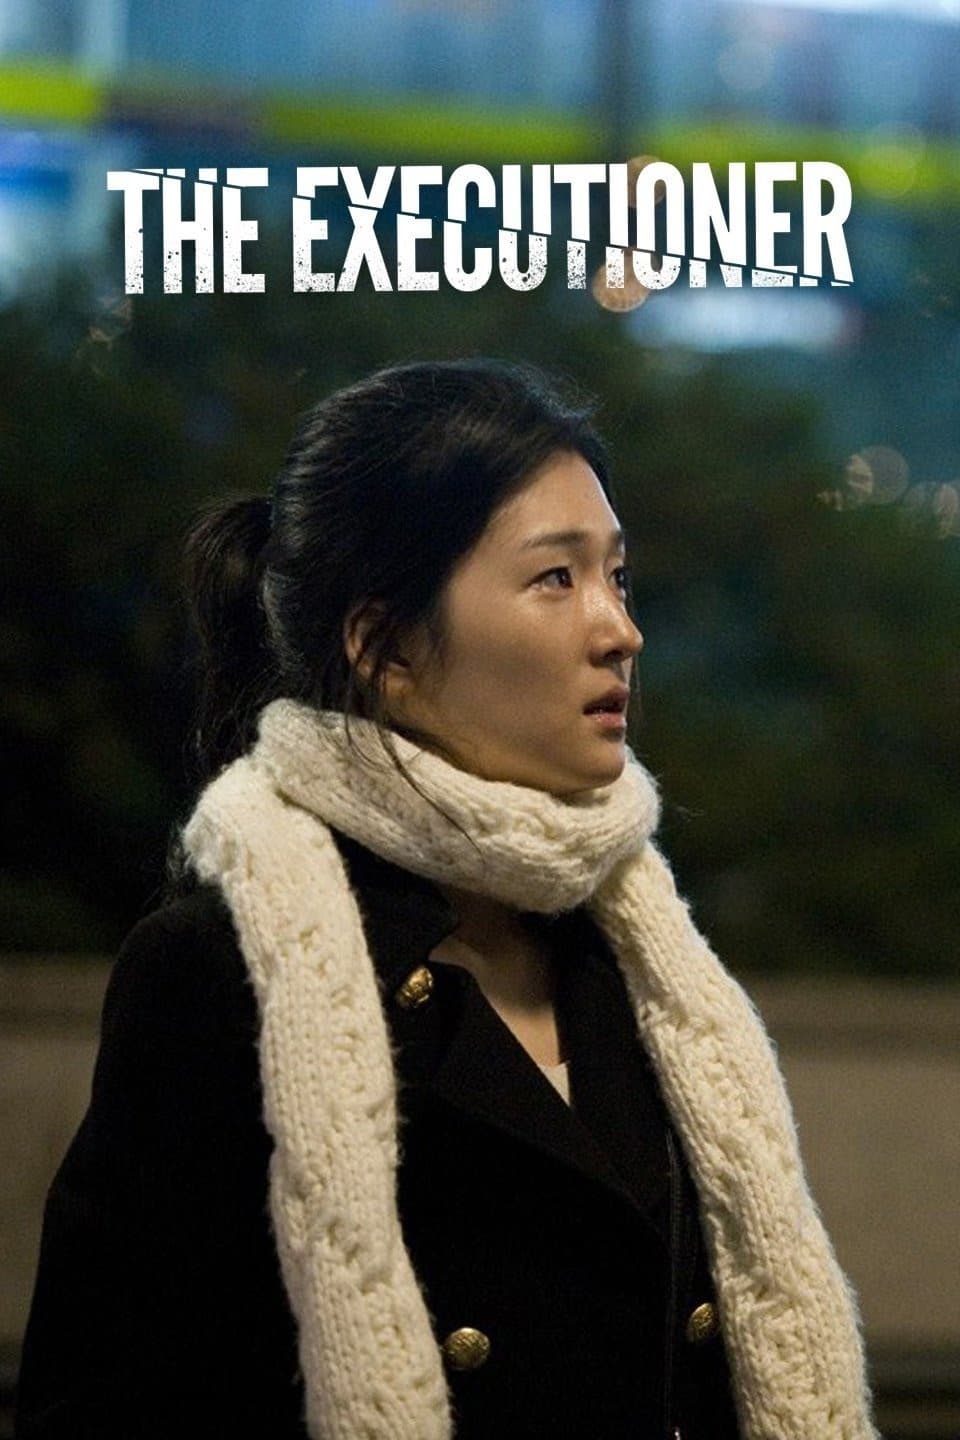 The Executioner (2009)